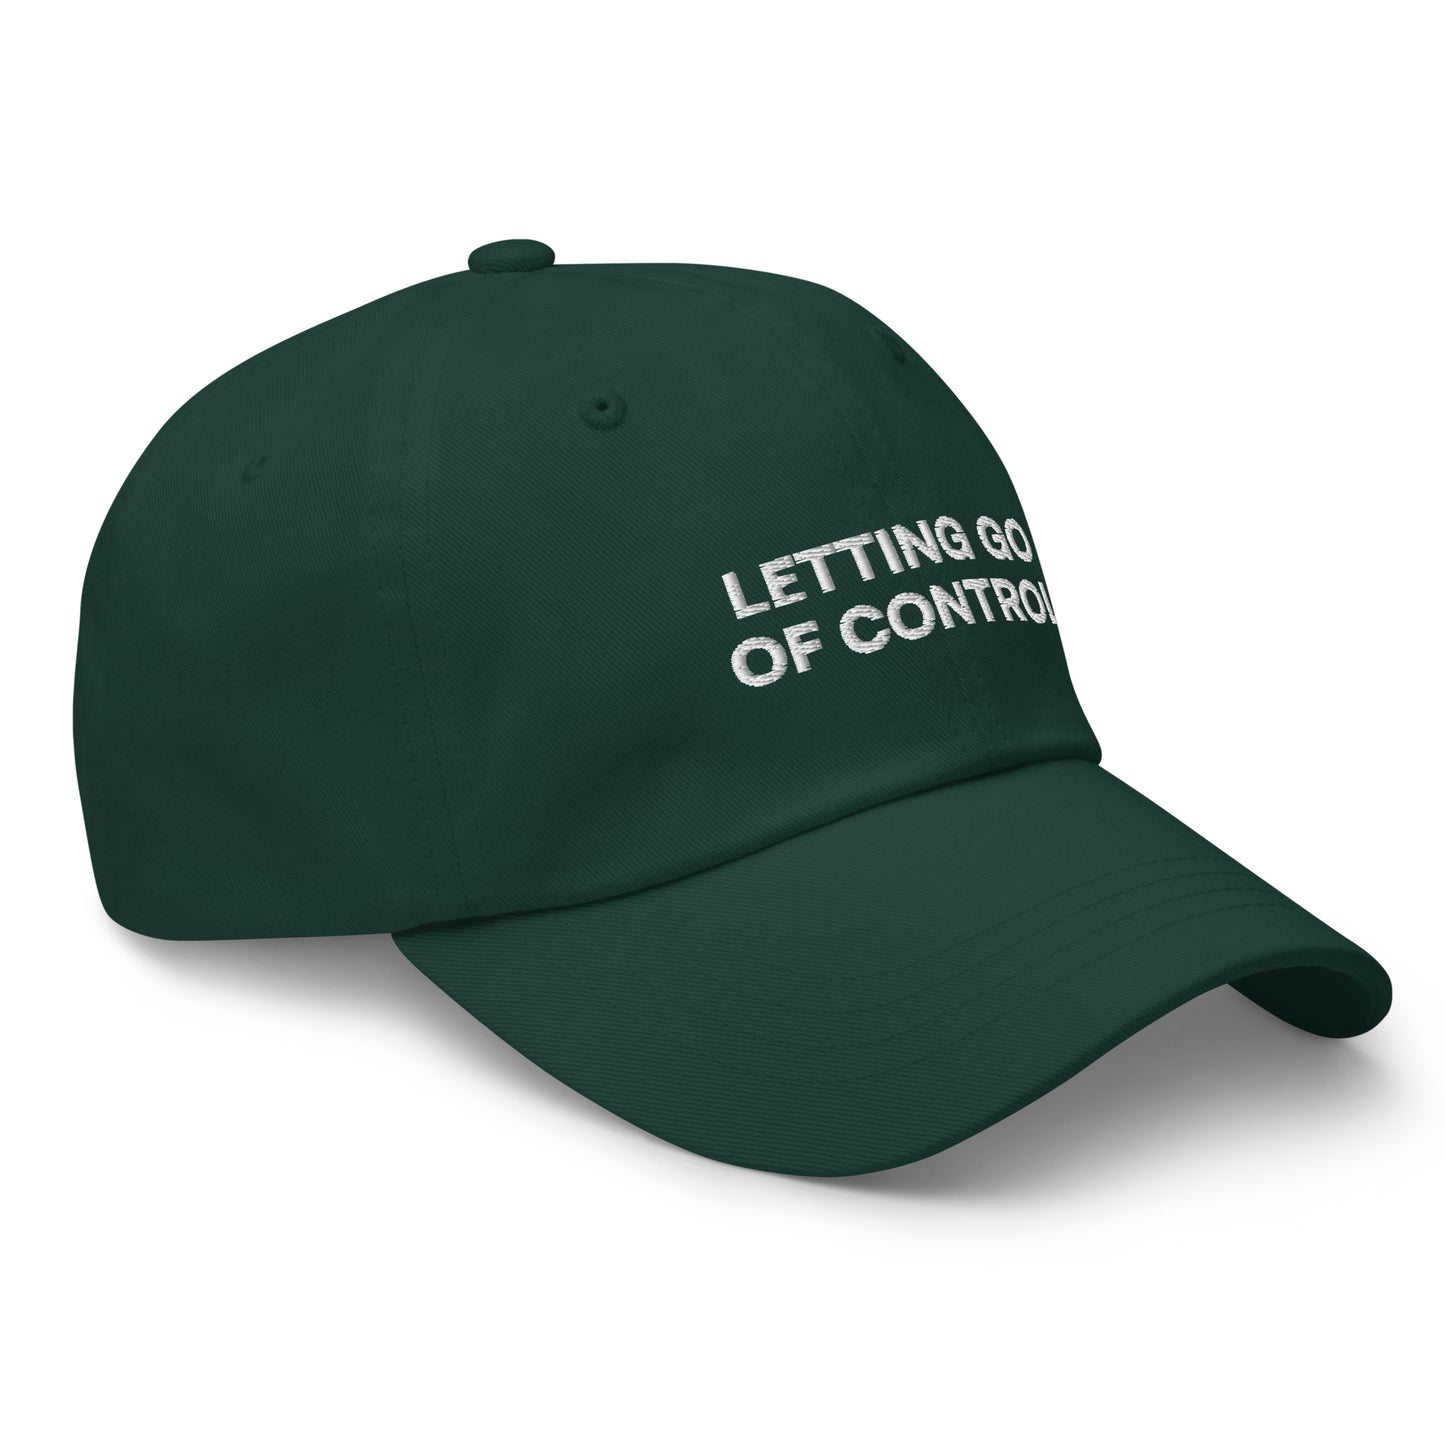 LETTING GO OF CONTROL (BLACK HAT)